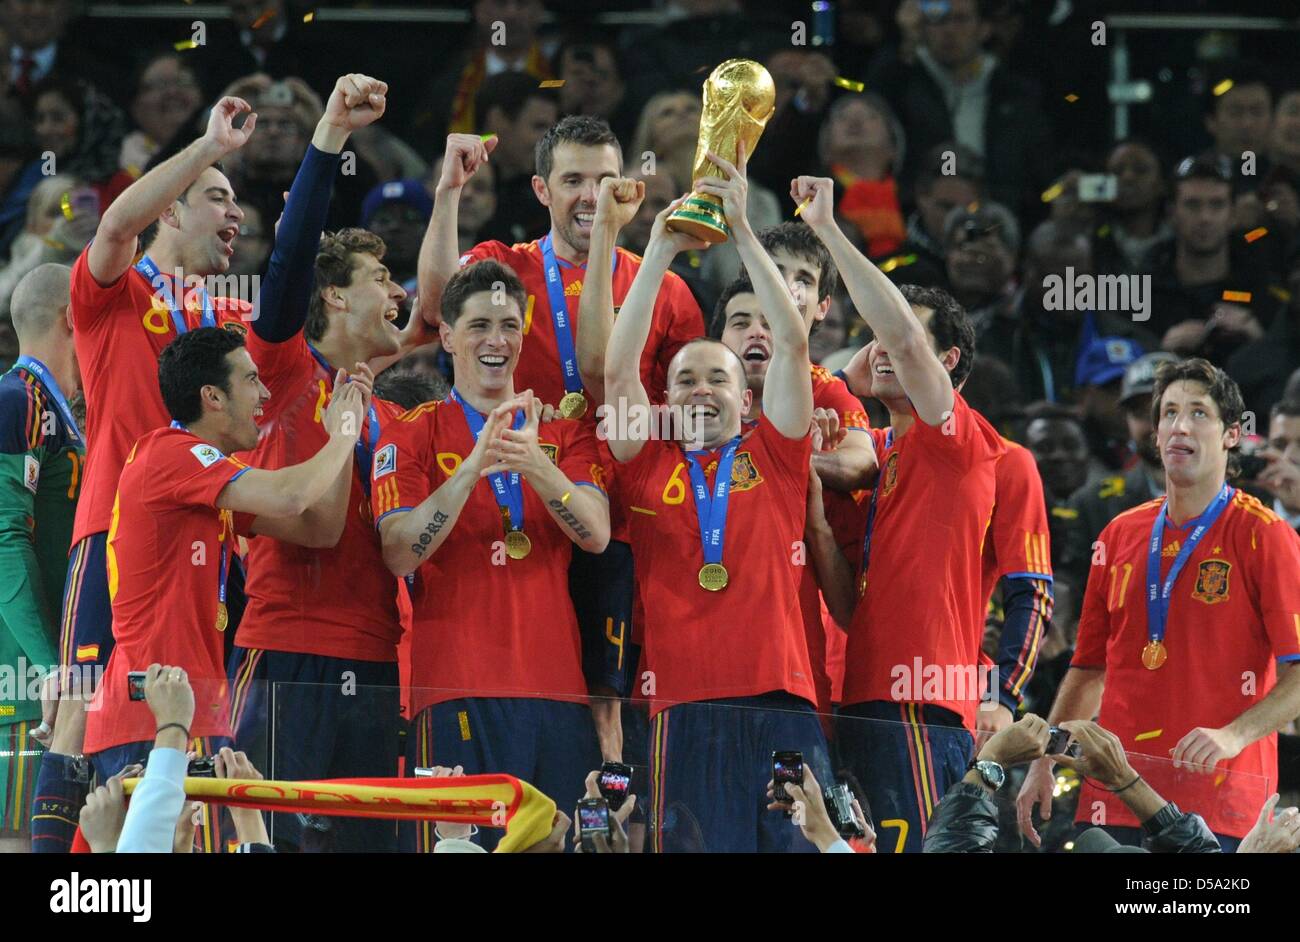 Andres Iniesta of Spain lifts the trophy after the 2010 FIFA World Cup final match between the Netherlands and Spain at the Soccer City Stadium in Johannesburg, South Africa 11 July 2010. Photo: Bernd Weissbrod dpa - Please refer to http://dpaq.de/FIFA-WM2010-TC  +++(c) dpa - Bildfunk+++ Stock Photo